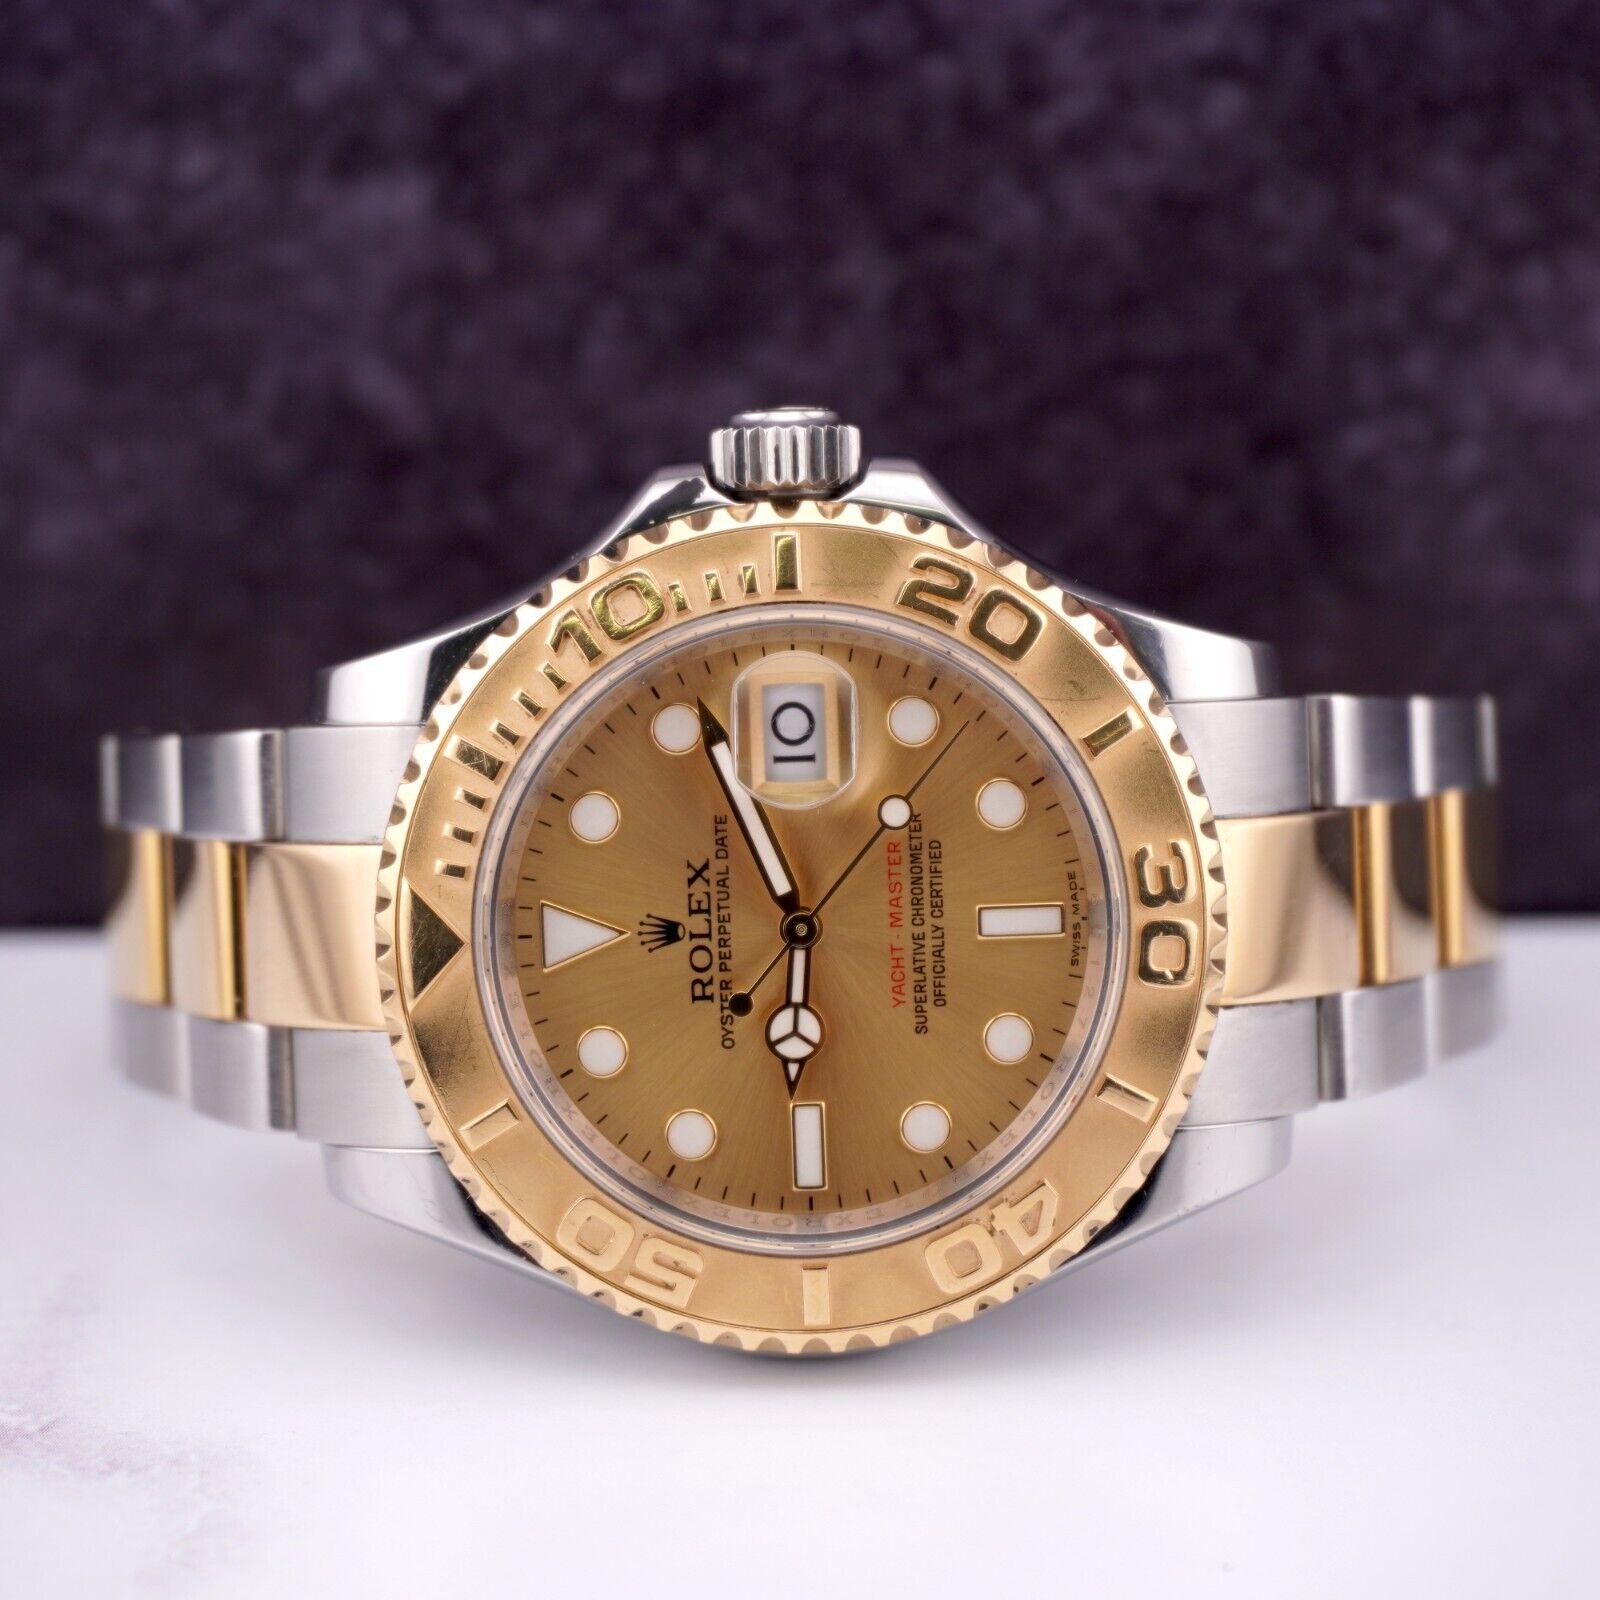 Rolex Yacht-Master 40mm Oyster Date 18k Yellow Gold & Steel Watch Dial 16623 In Good Condition For Sale In Pleasanton, CA